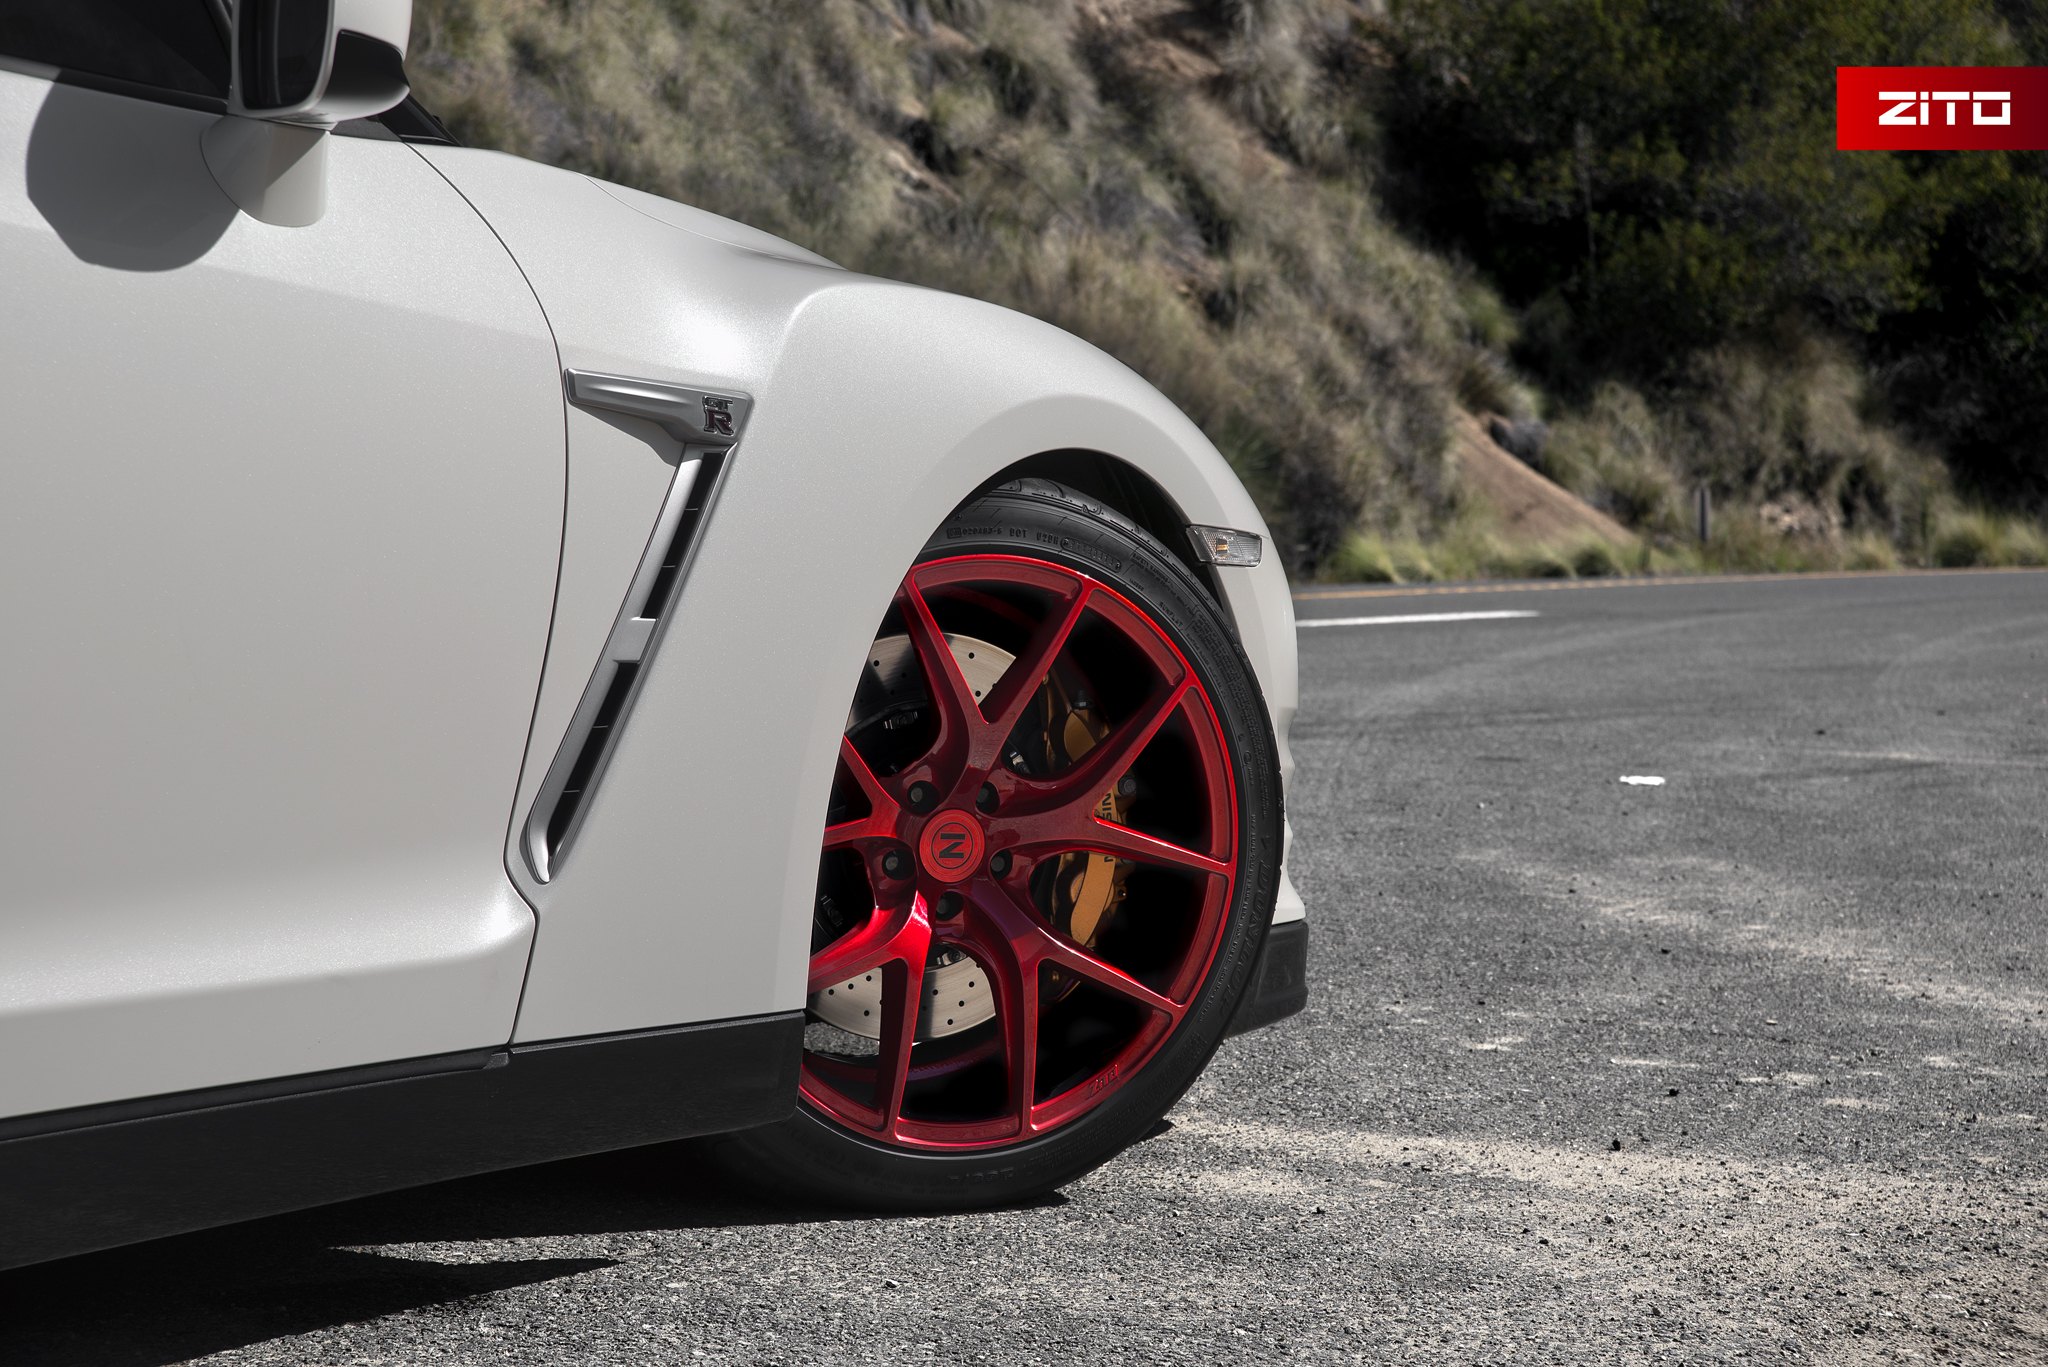 Gloss Red Zito Rims on White Nissan GT-R - Photo by Zito Wheels